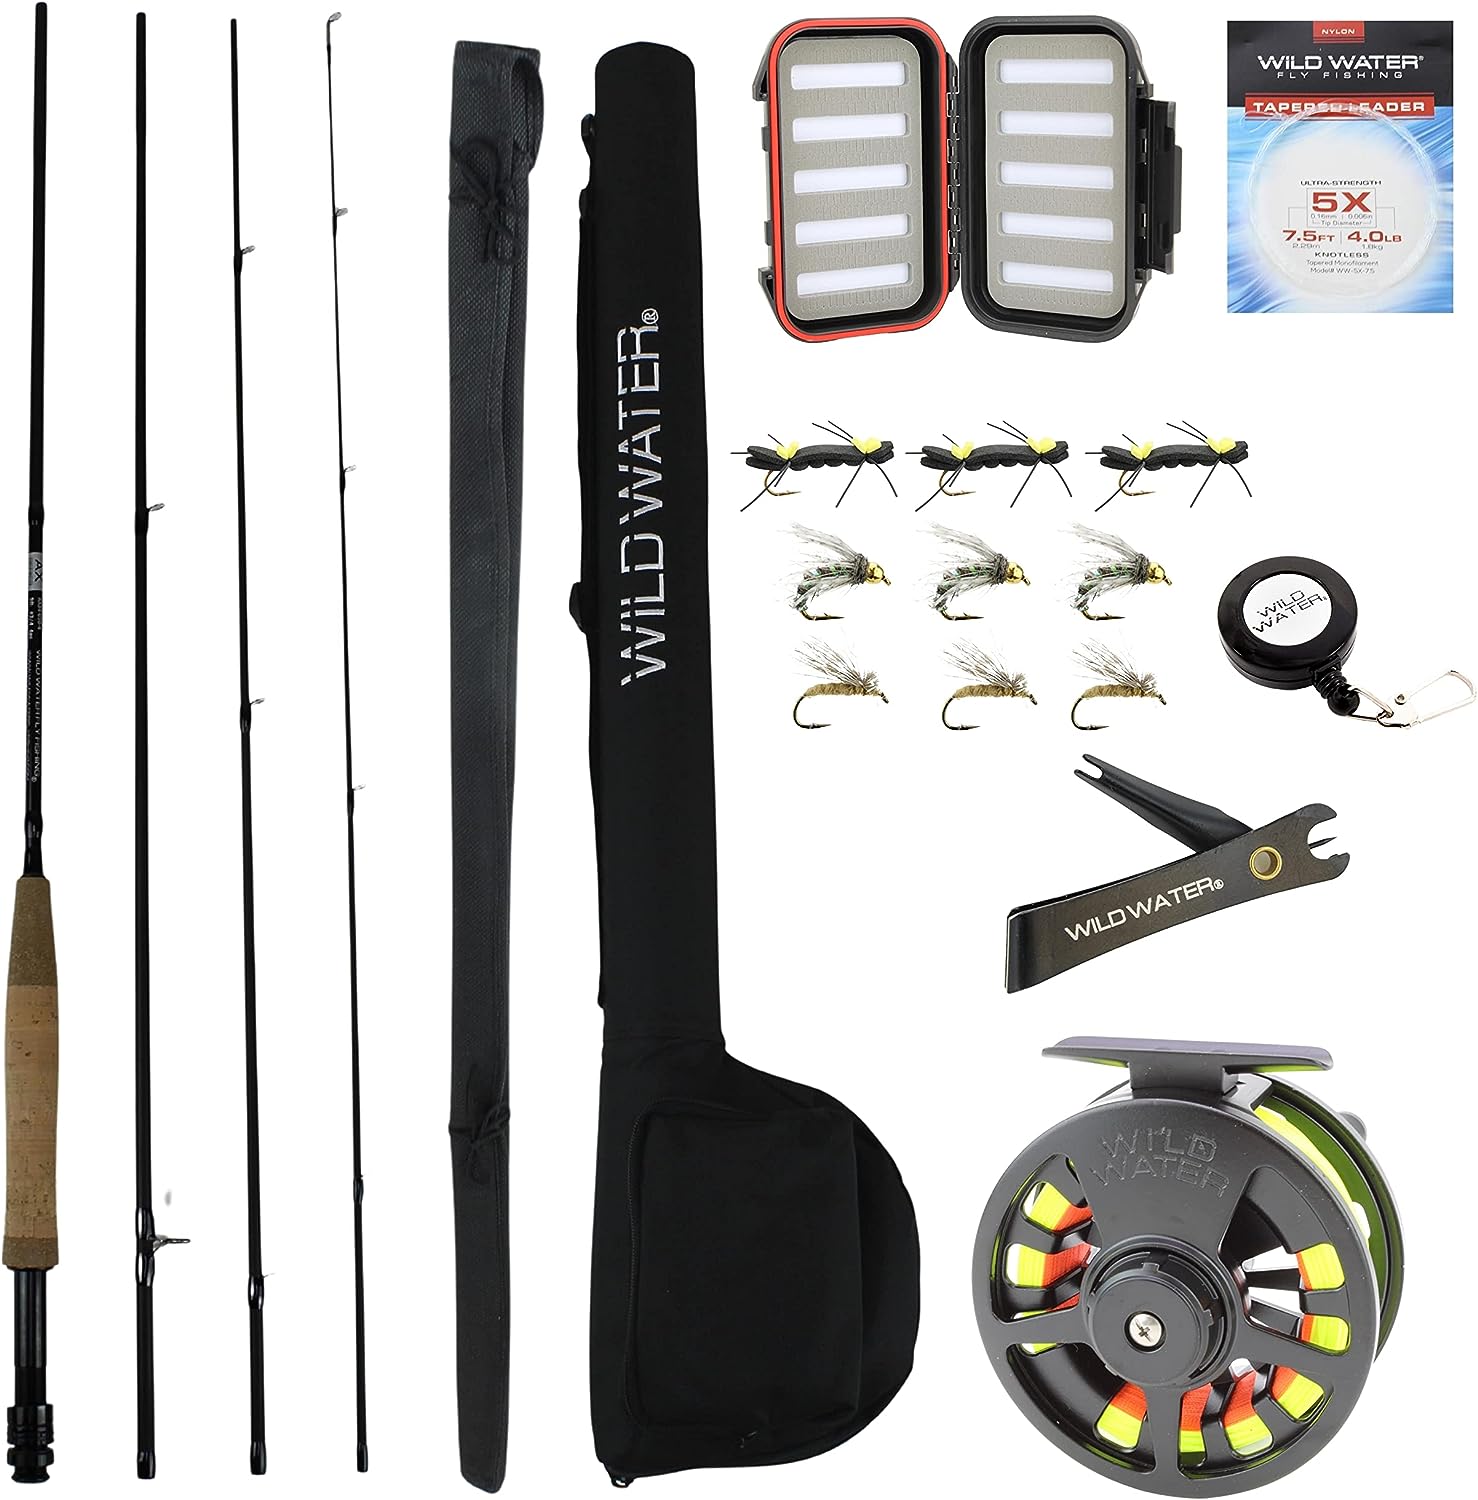 Wild Water Standard Fly Fishing Combo Starter Kit 5 or 6 Weight 9 Foot Fly Rod 4-Piece Graphite Rod with Cork Handle Accessories Die Cast Aluminum Re